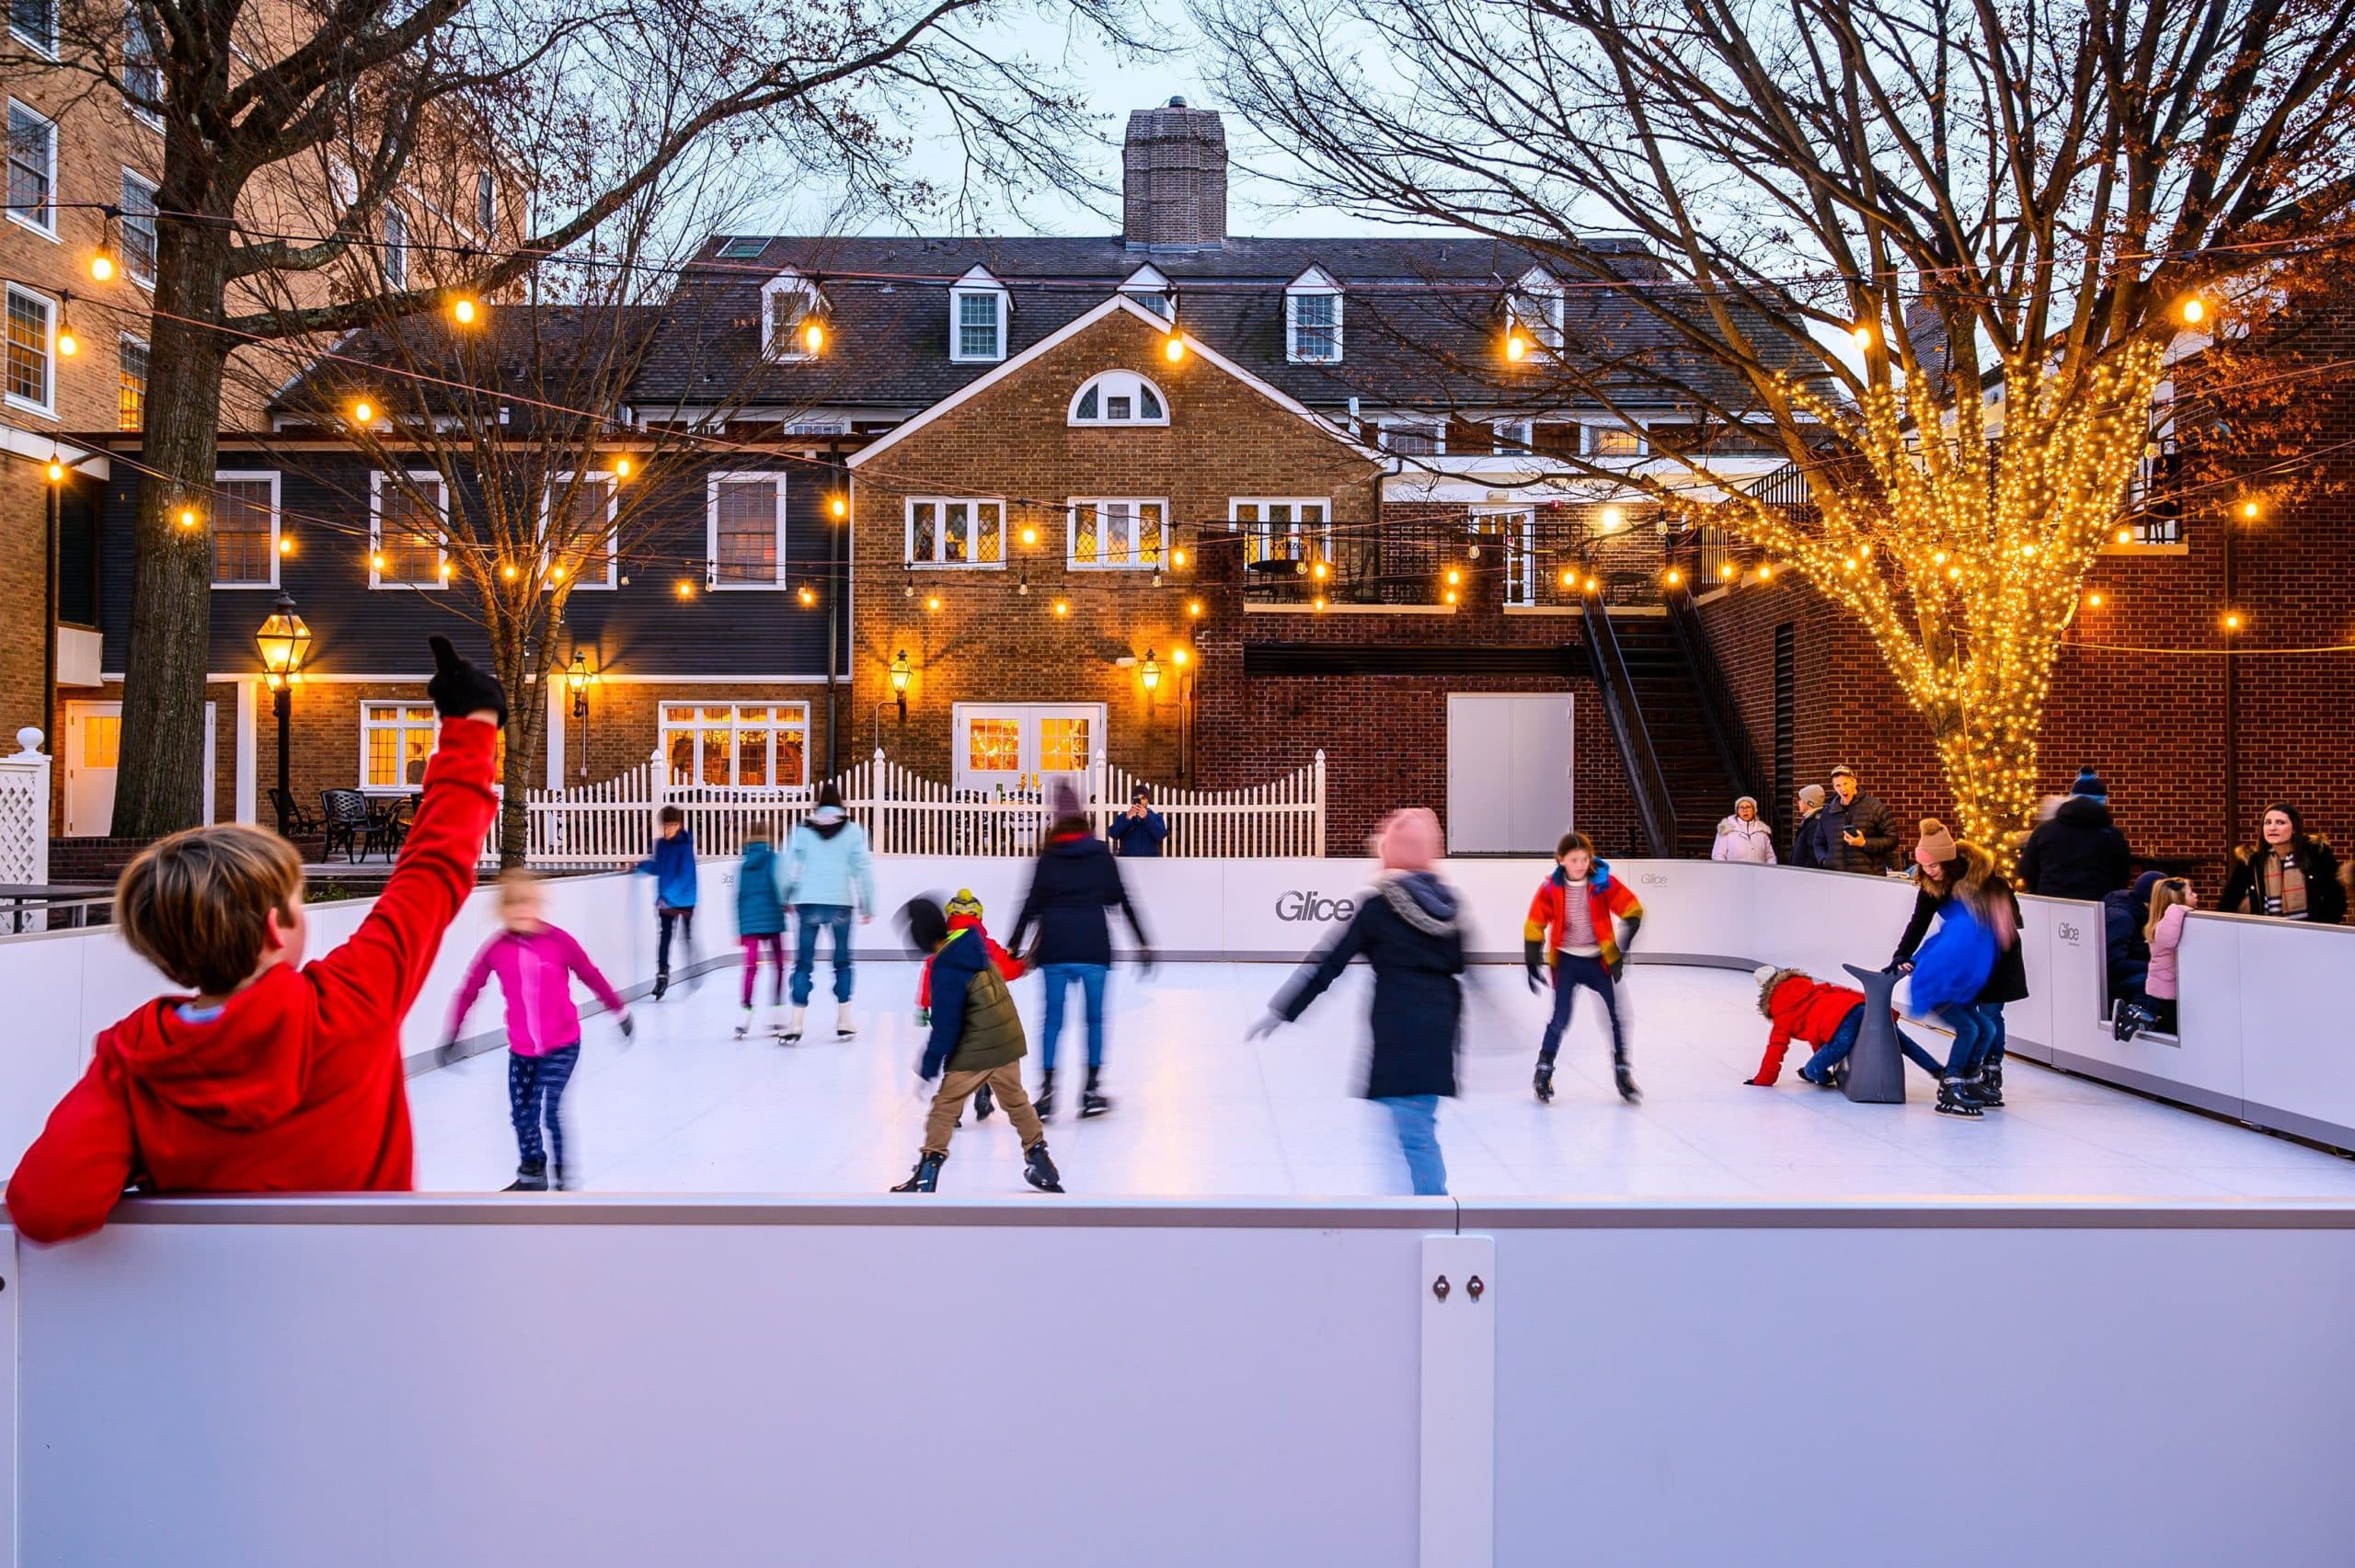 People skating on outdoor ice-rink